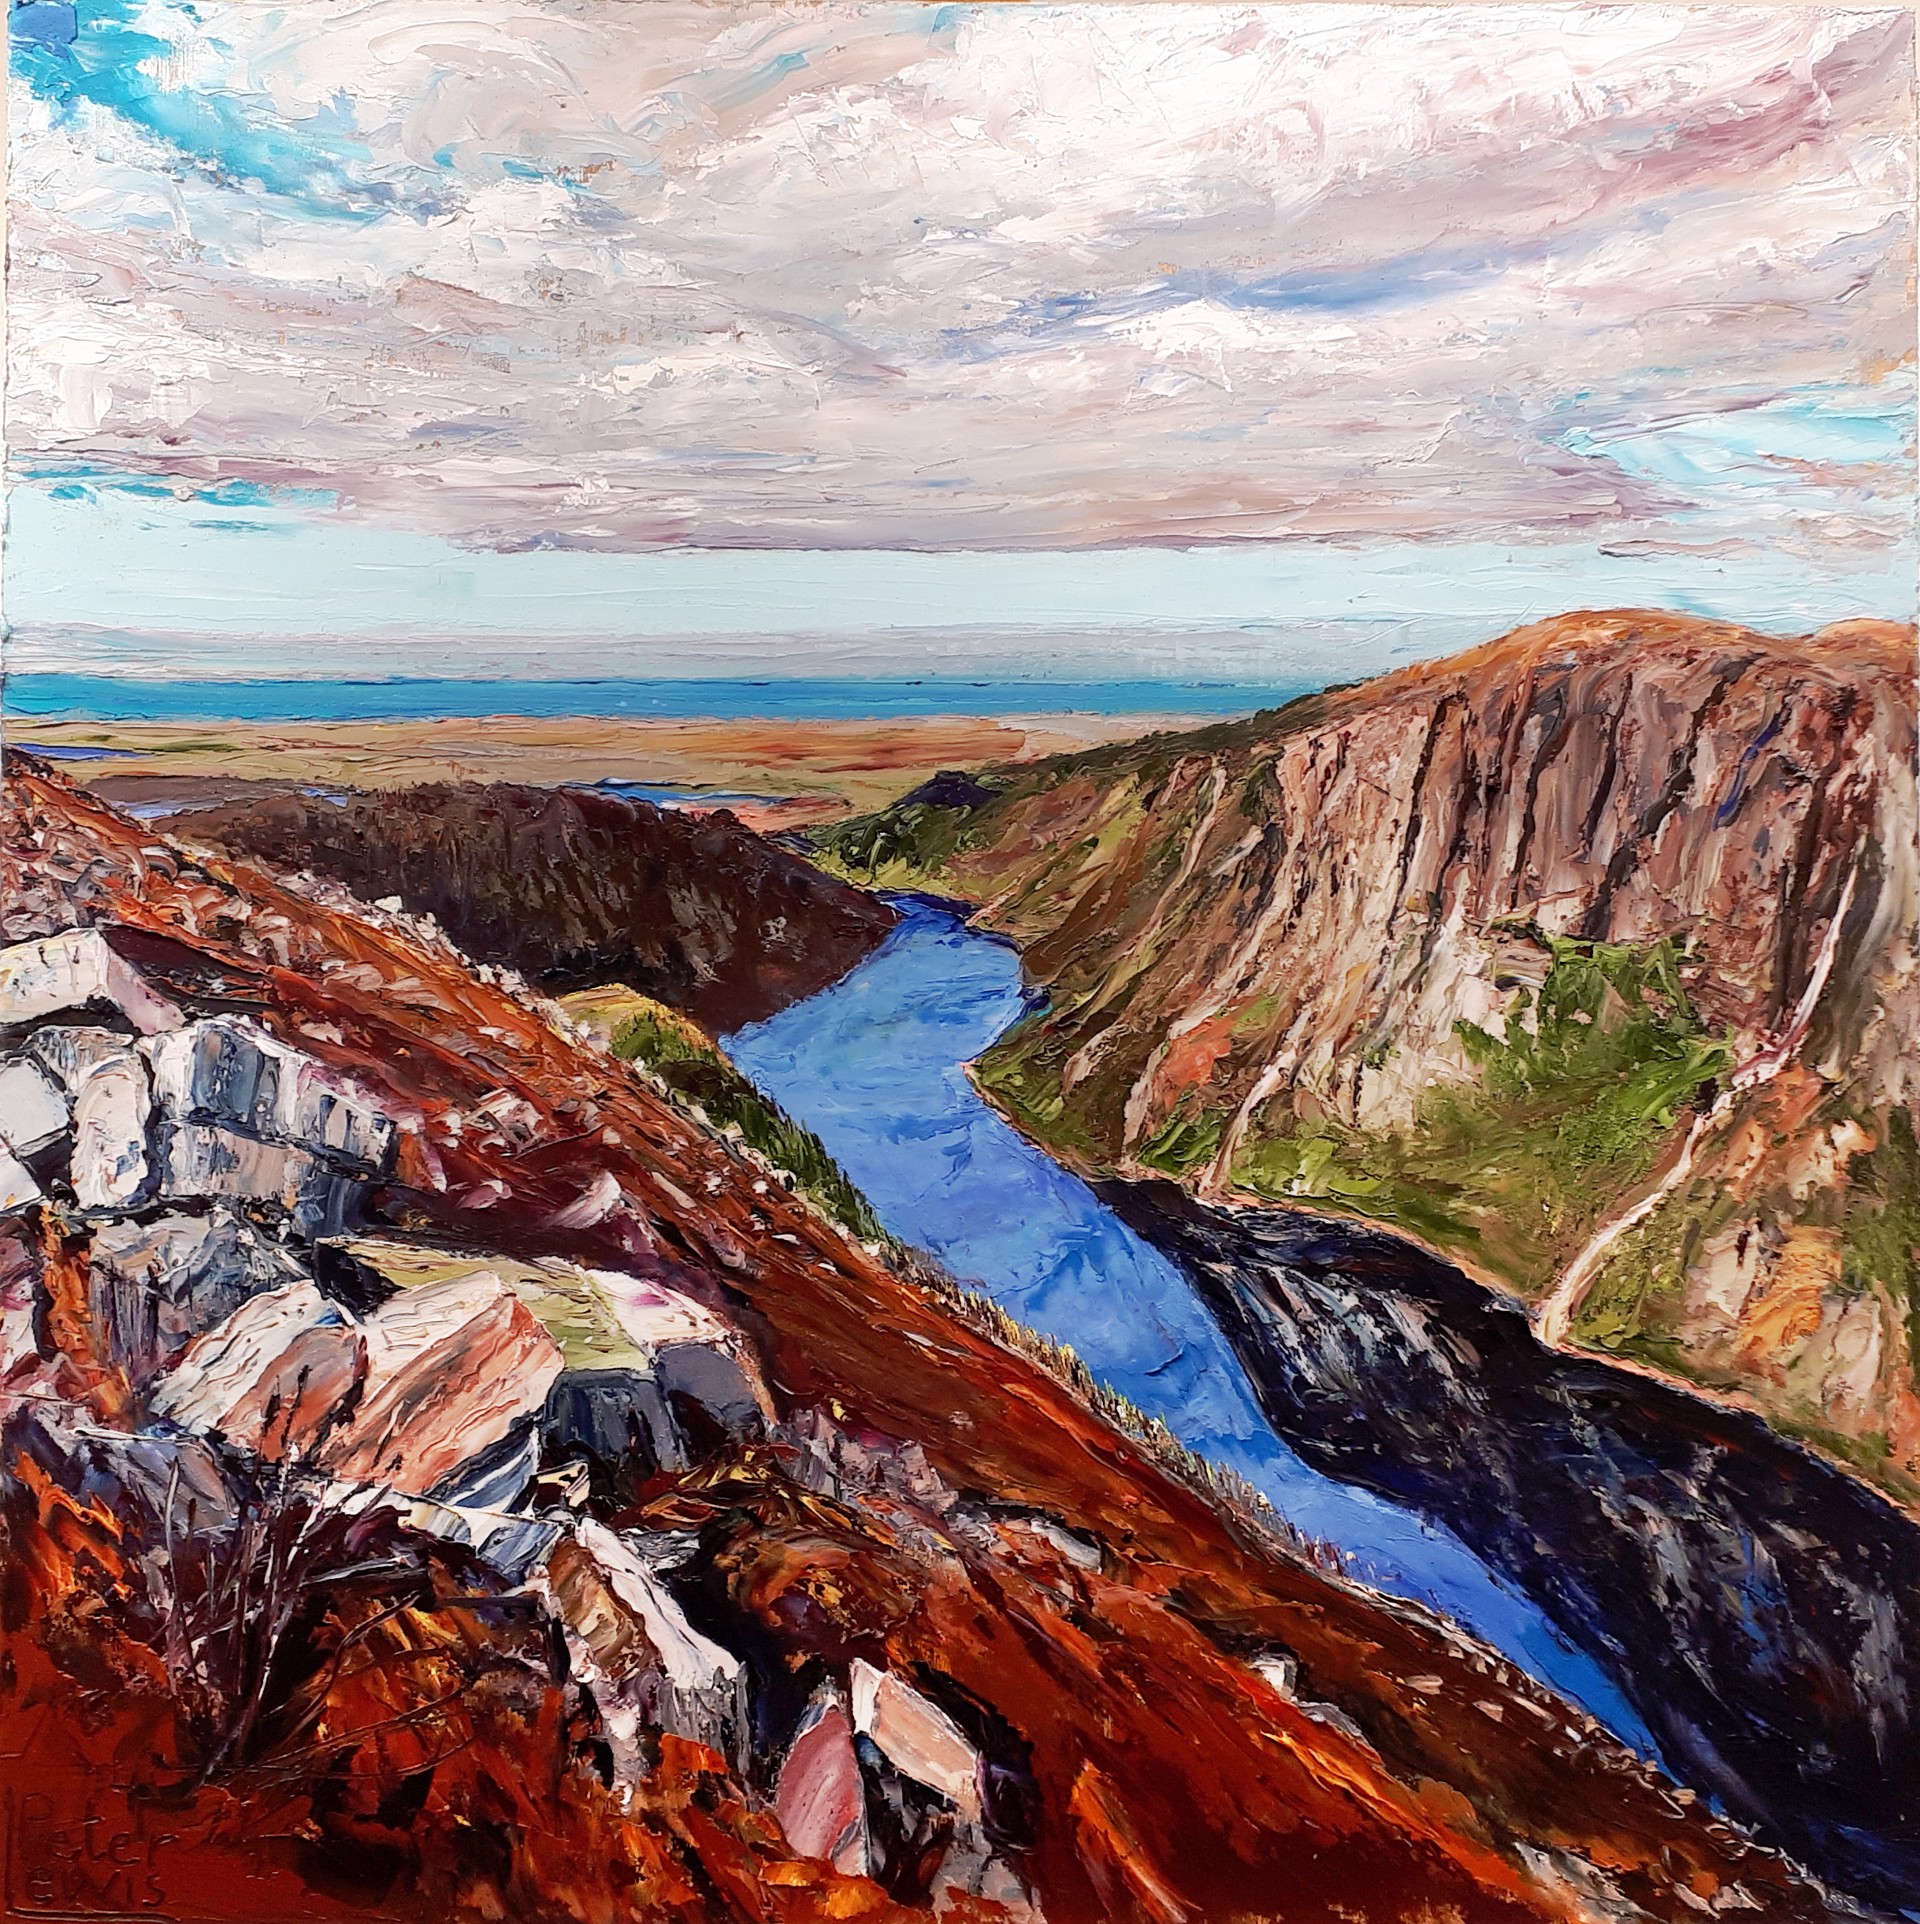 Gros Morne, Ten Mile Pond to the Sea by Peter Lewis